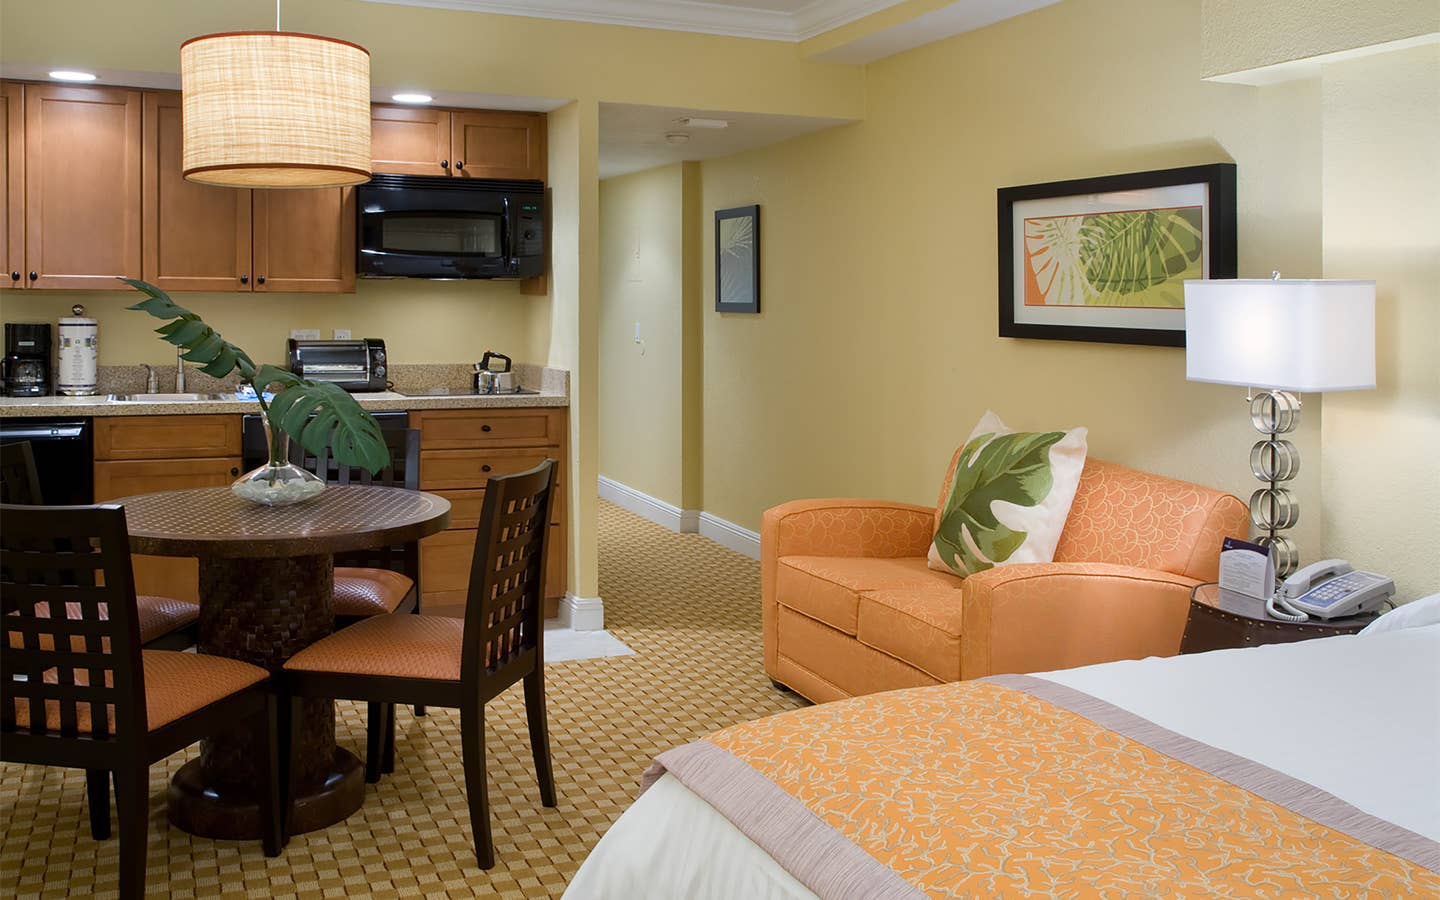 Small dining area and kitchenette in a studio room in West Village at Orange Lake Resort near Orlando, FL